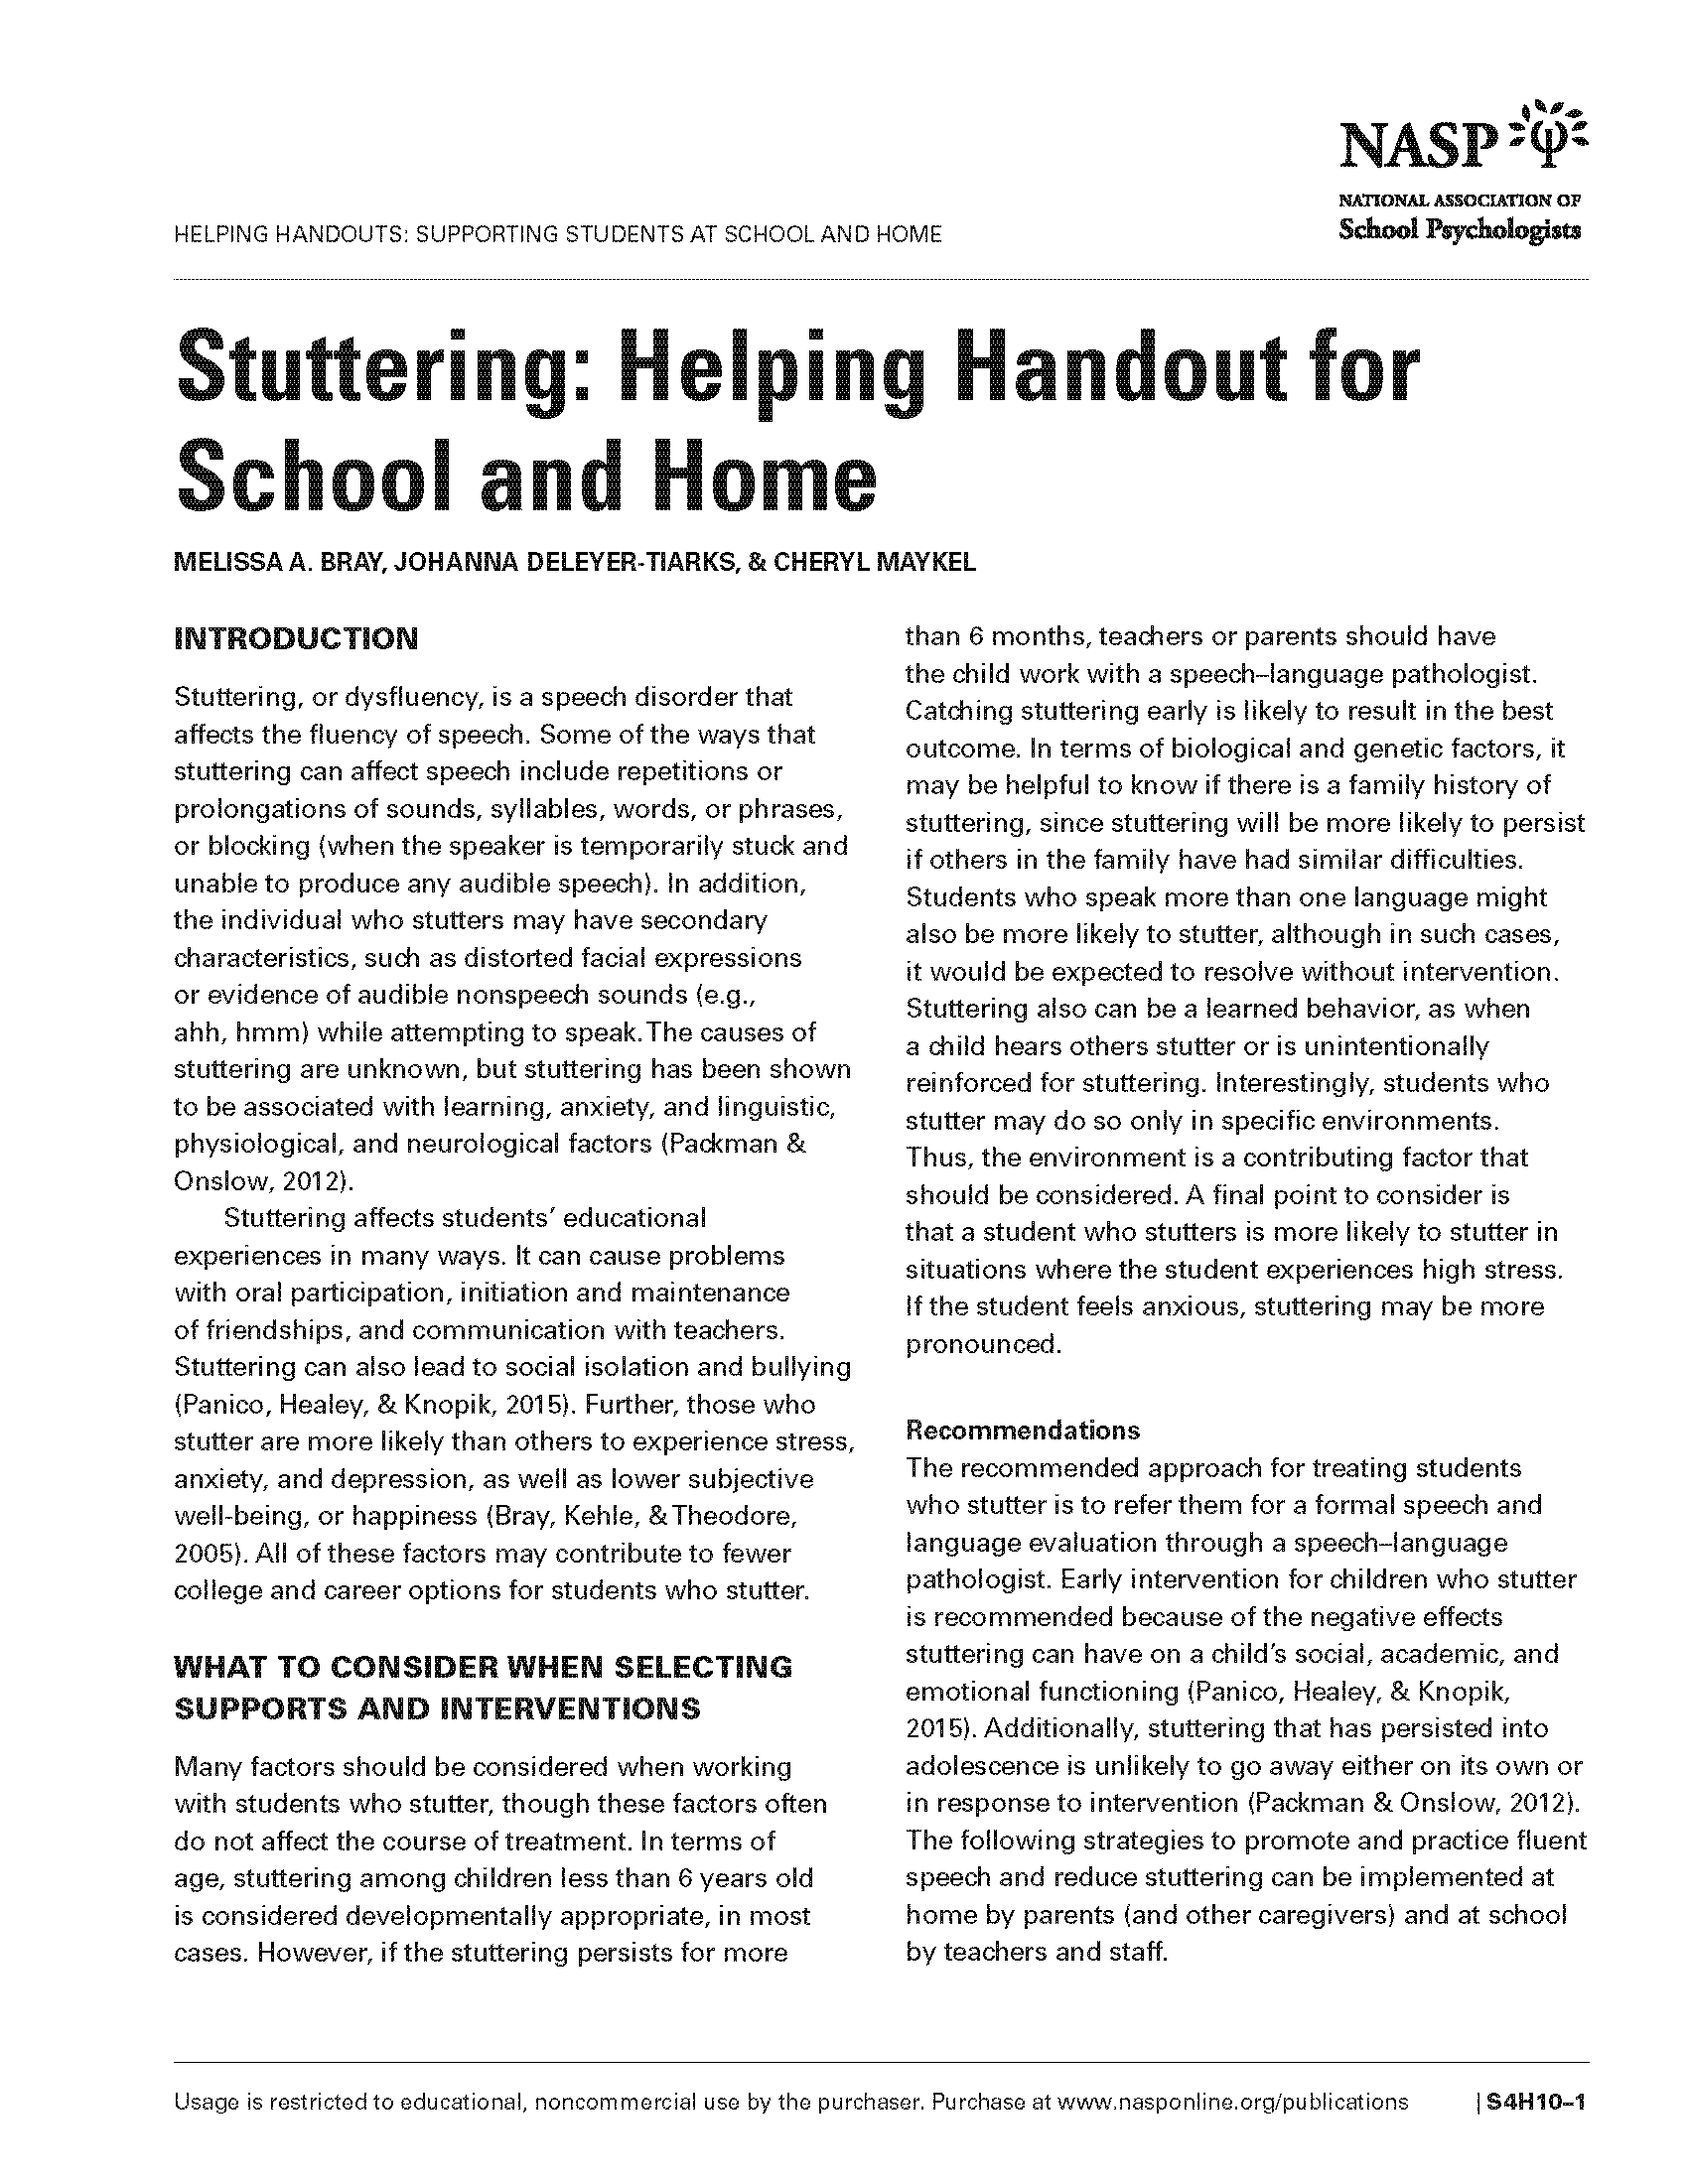 Stuttering: Helping Handout for School and Home